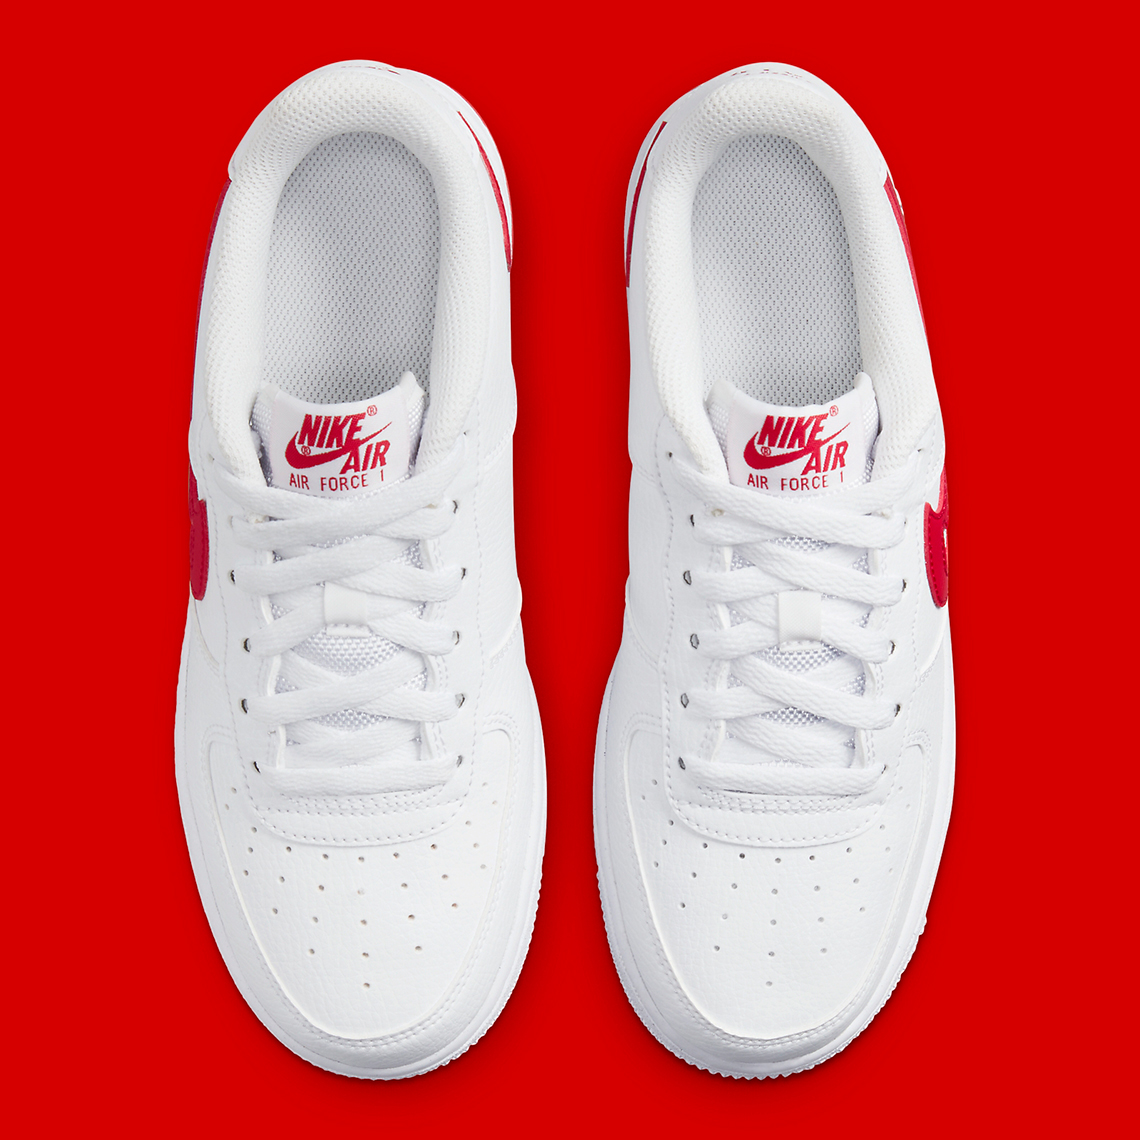 nike air force 1 low gs white red DR7970 100 3 1